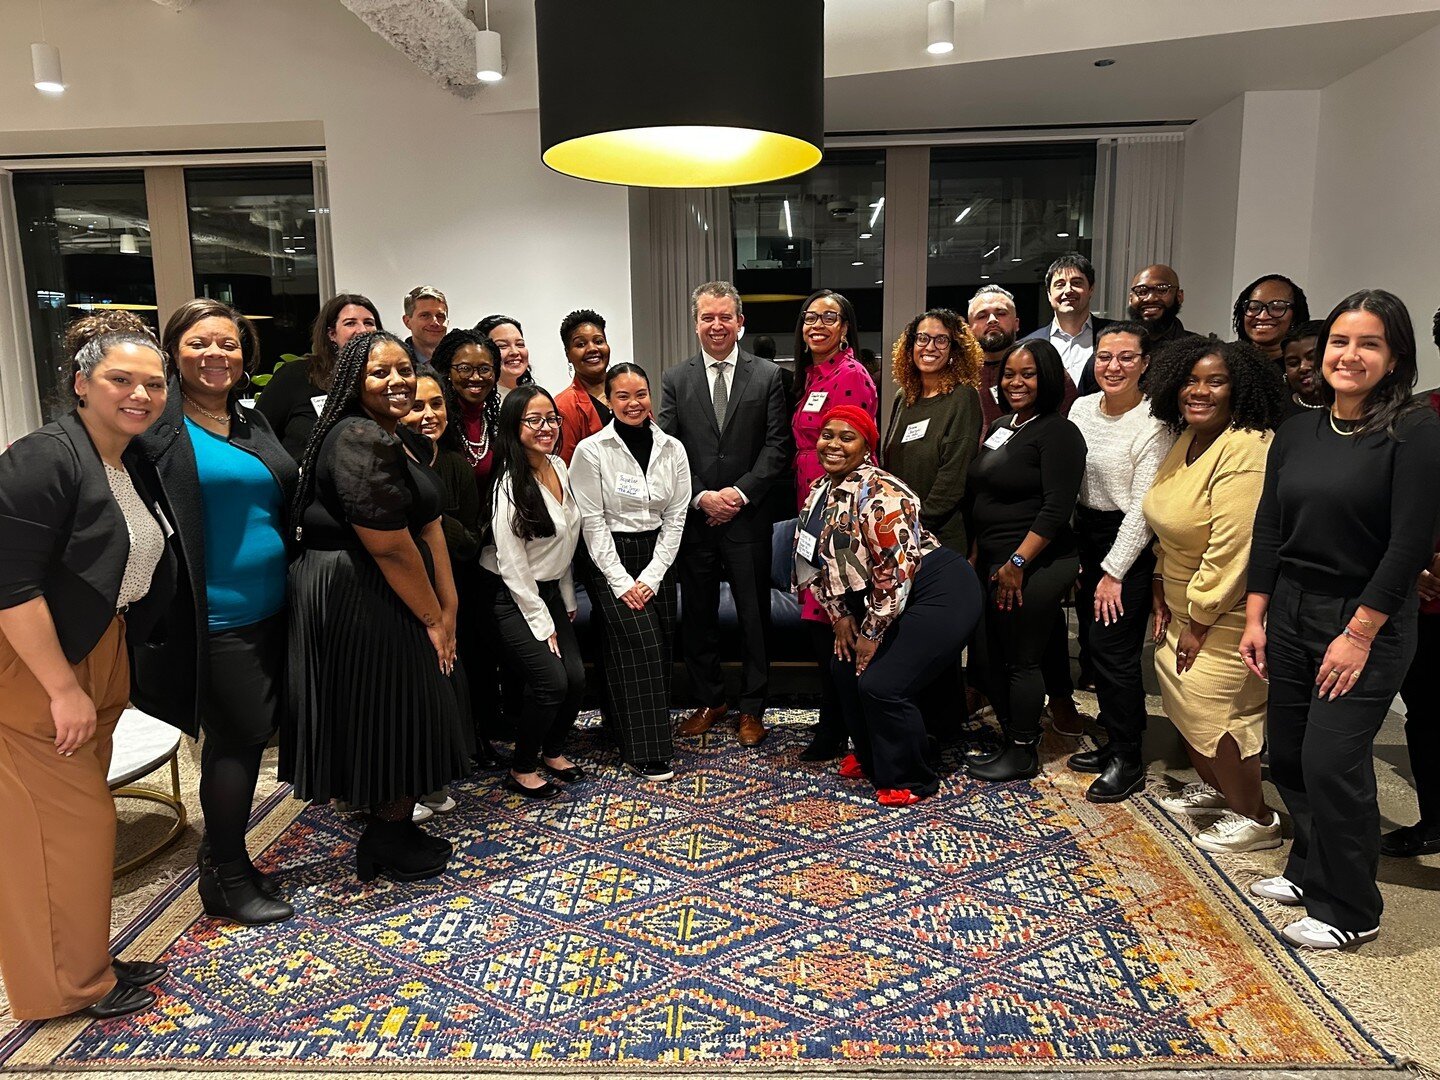 Thank you to @chipublicschools CEO Pedro Martinez for speaking with our alumni last night! We appreciated your honest and open dialogue about the challenges and the successes you've had while running the fourth largest school district in the country.